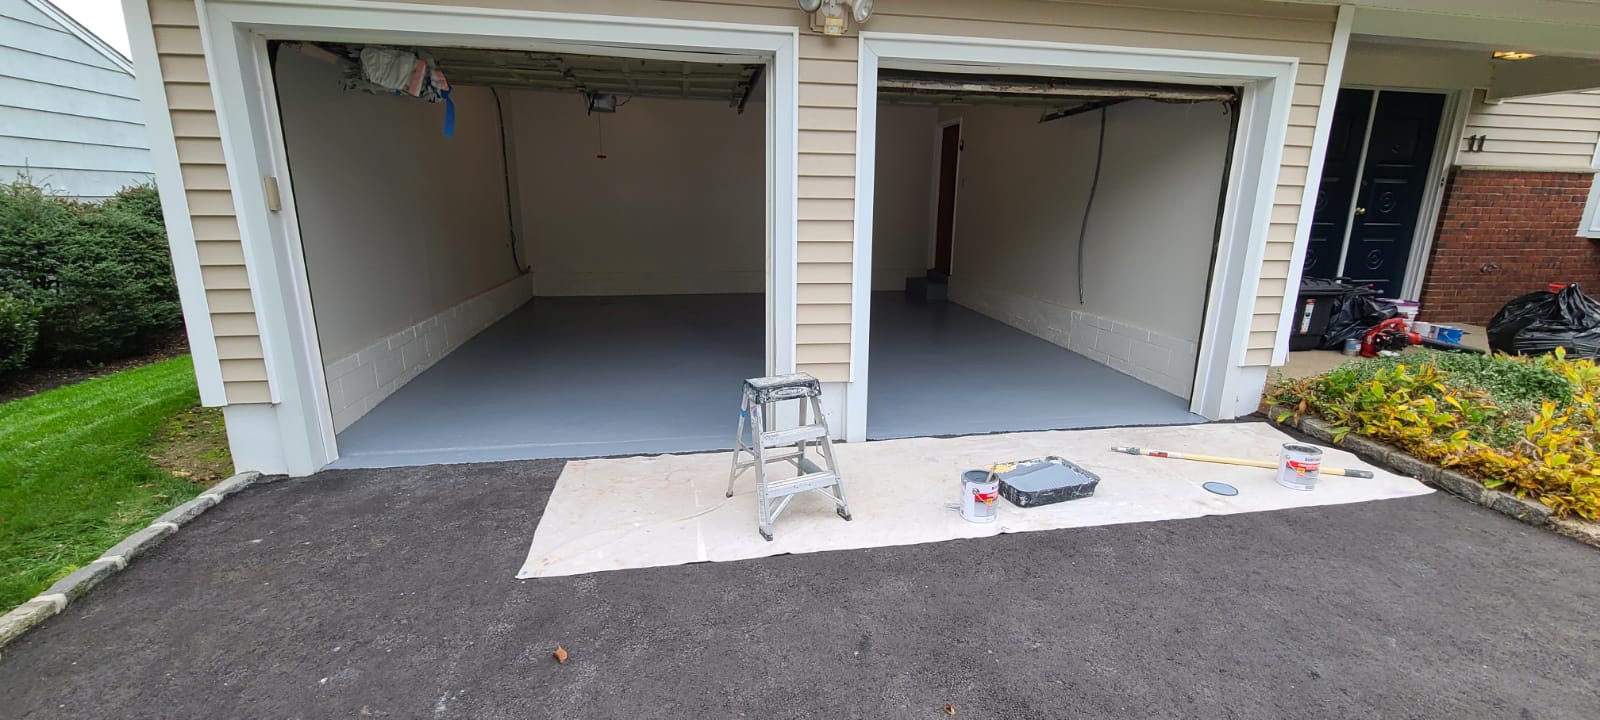 Painting a garage floor with heavy duty paint